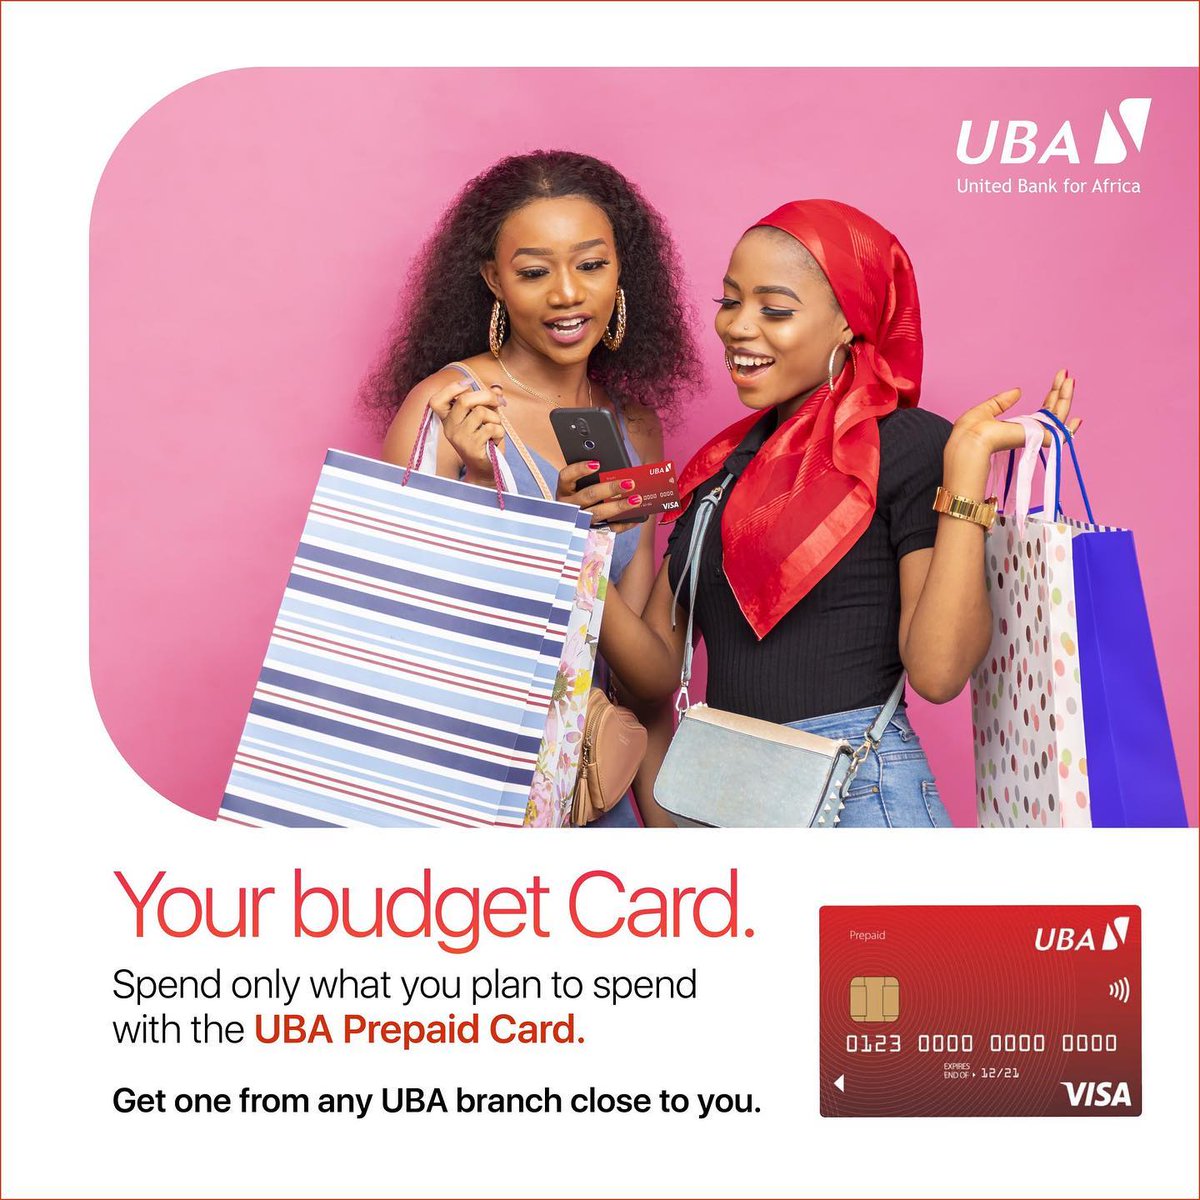 Do you love shopping but always exceed your budget? Get the UBA Prepaid Card to manage your budget easily. All you need is a national ID and passport photo Visit any UBA Branch countrywide to get your card issued instantly. Or call 0800100030/0780142329…